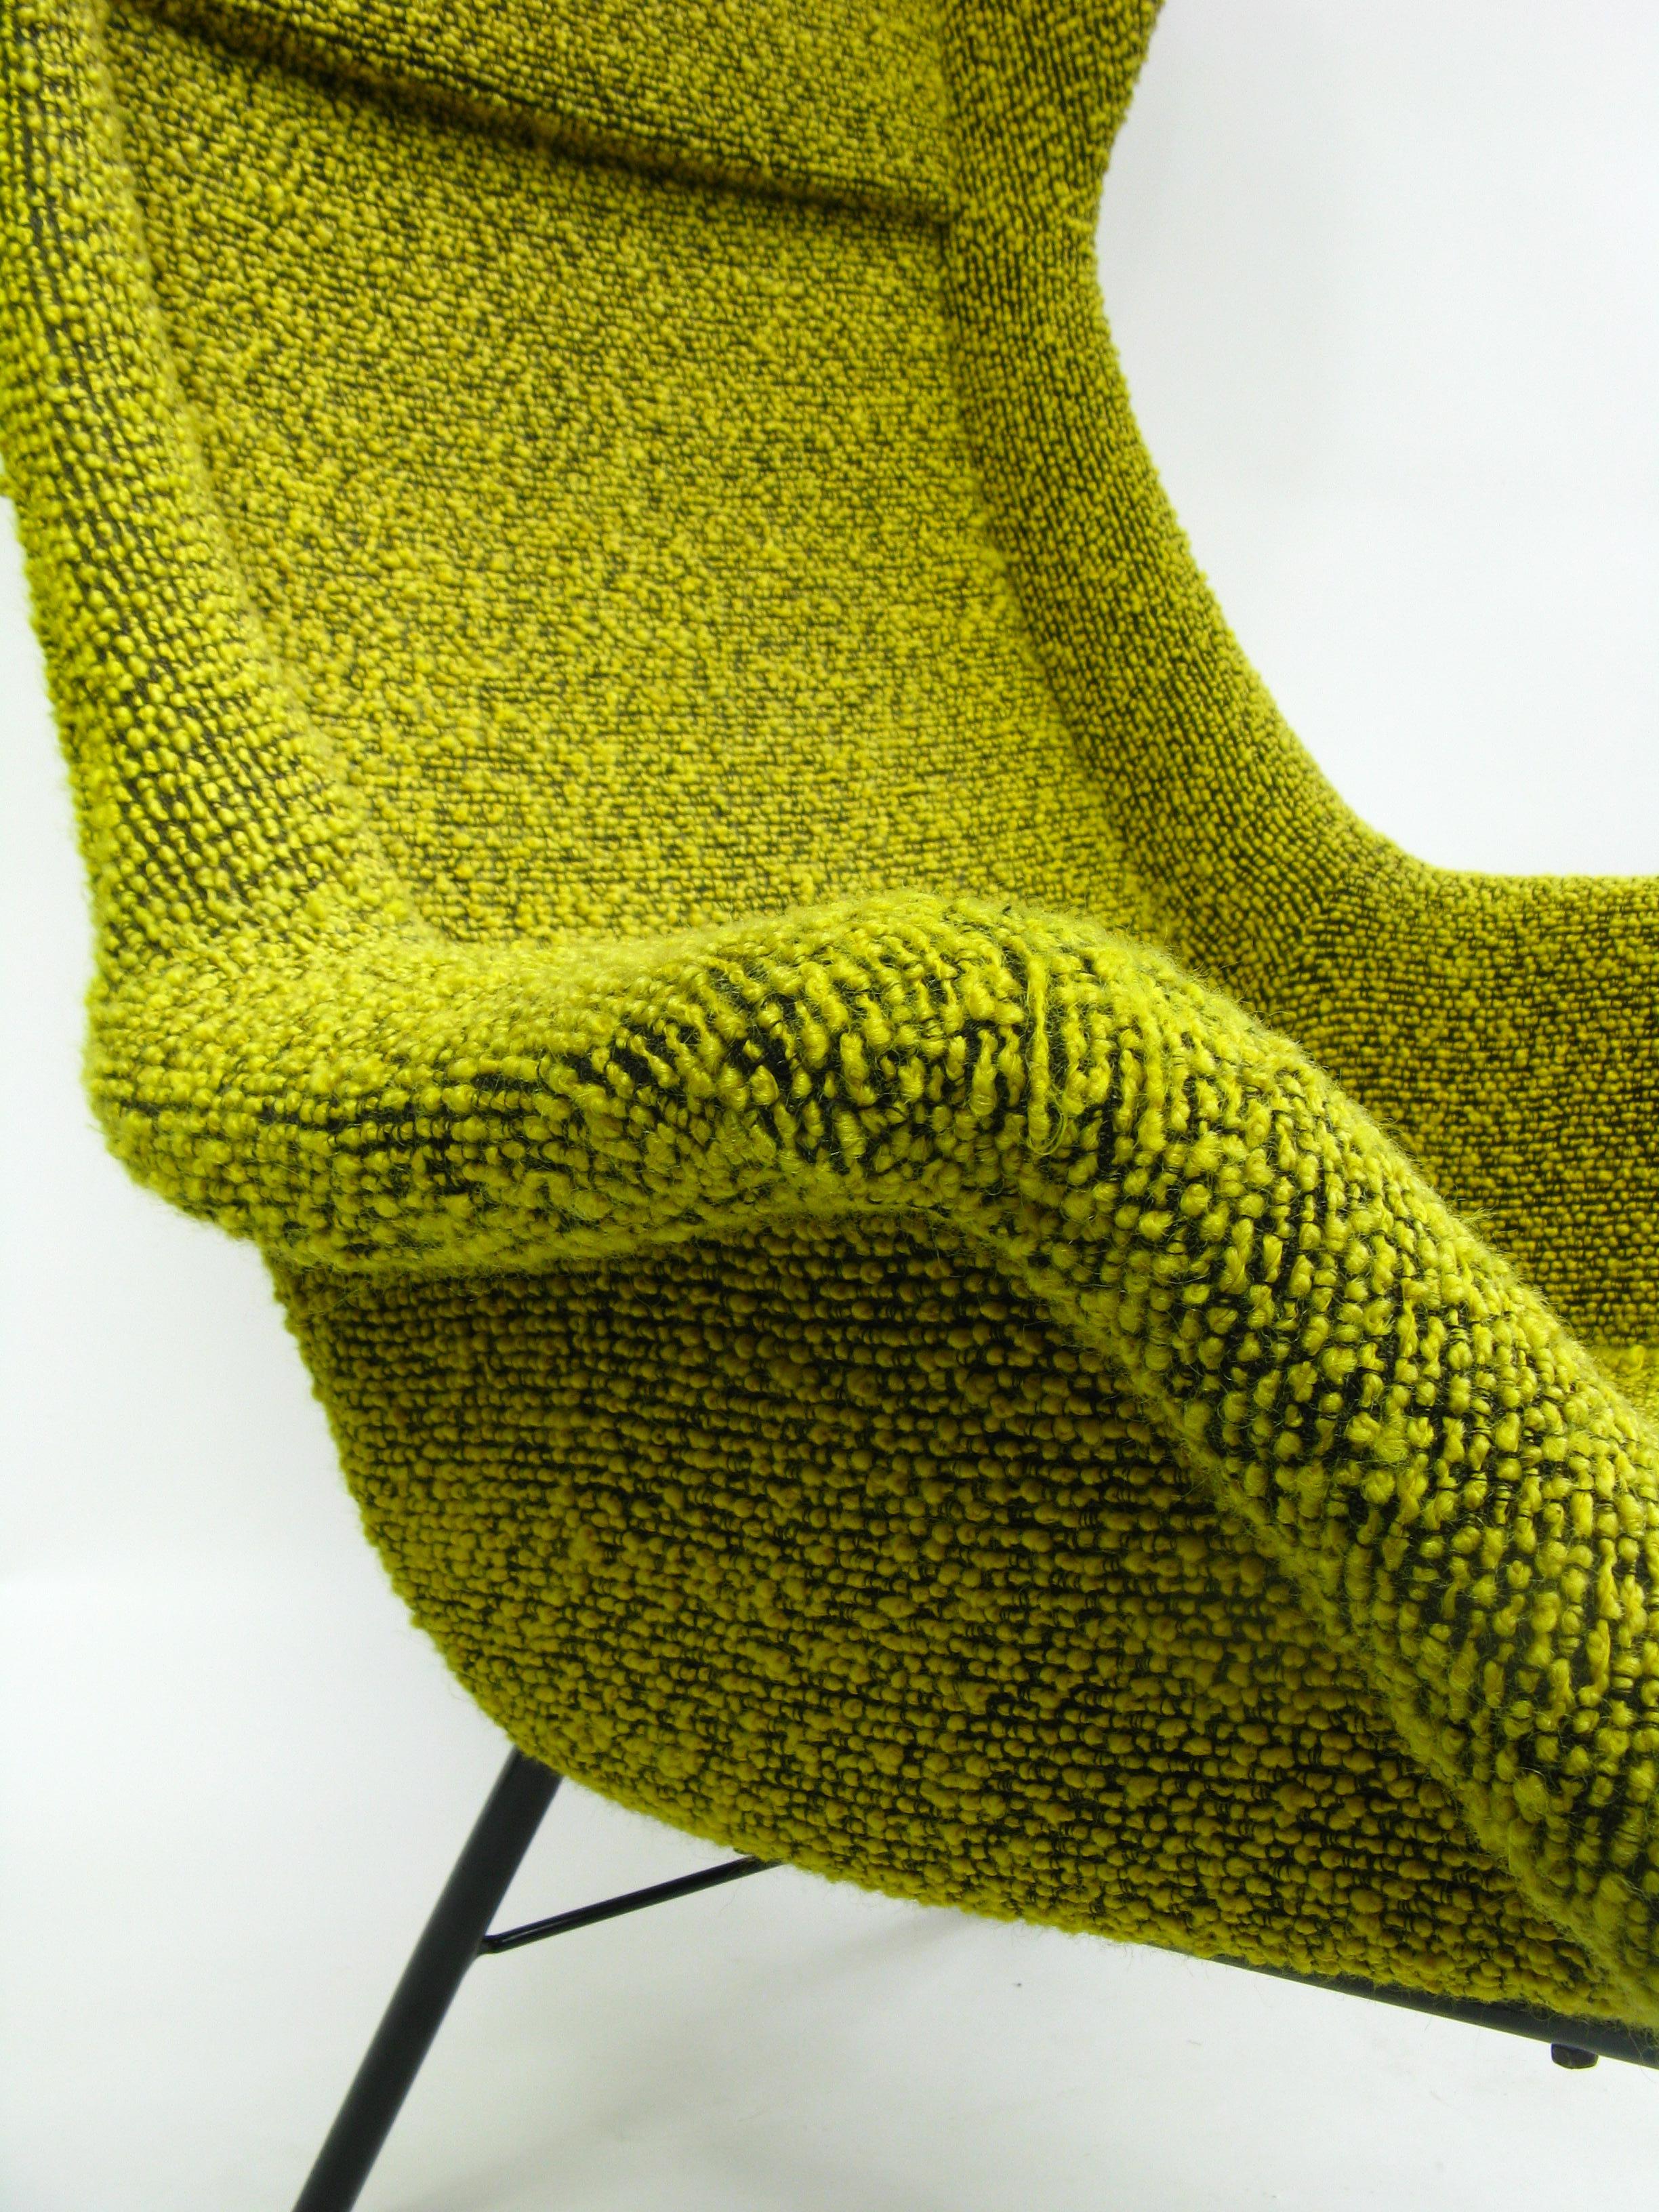 Czech Yellow and Green Wingback Armchair by Miroslav Navratil for Ton, 1960s For Sale